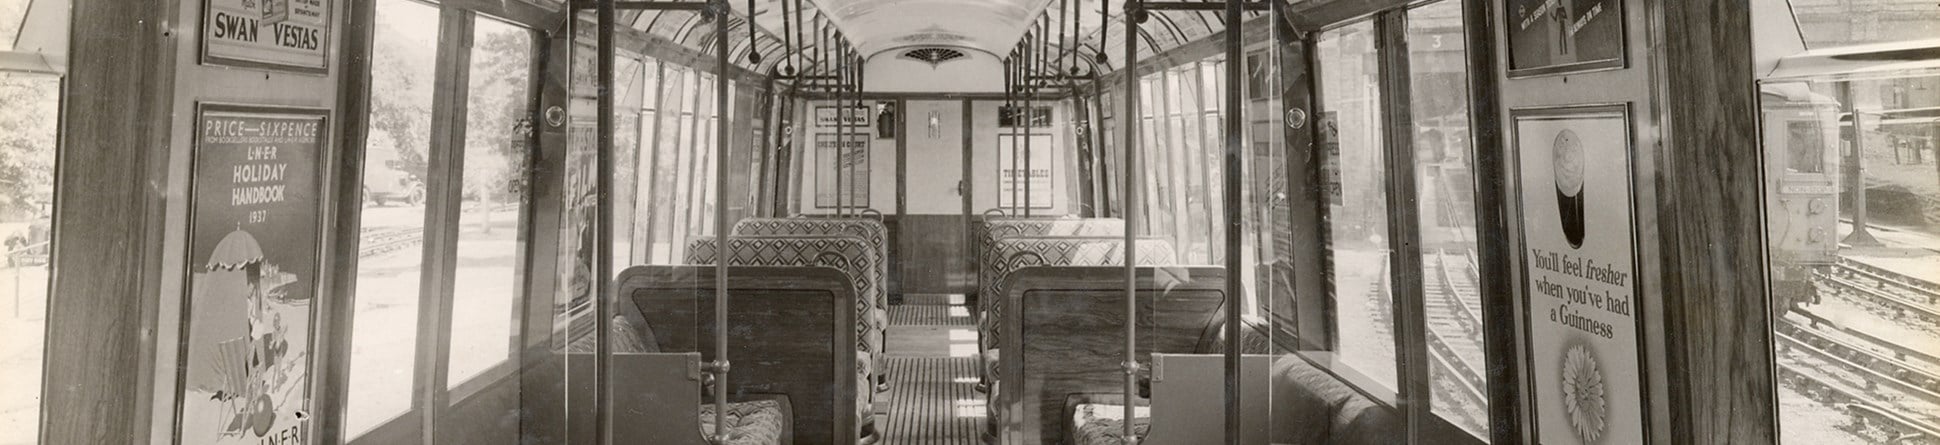 Interior of tube carriage